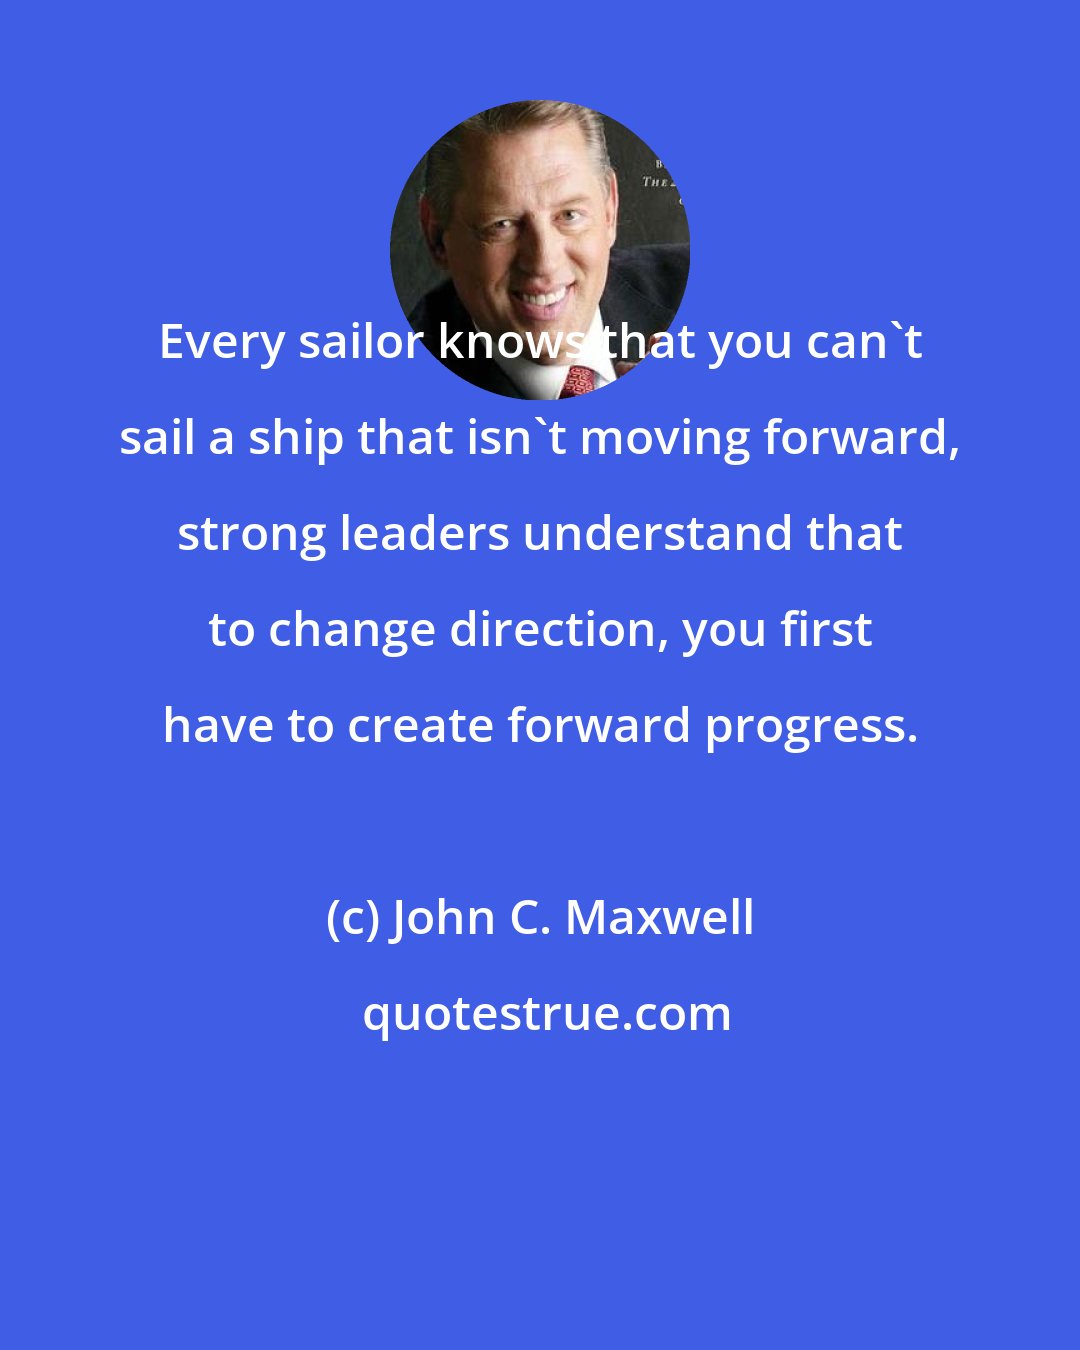 John C. Maxwell: Every sailor knows that you can't sail a ship that isn't moving forward, strong leaders understand that to change direction, you first have to create forward progress.